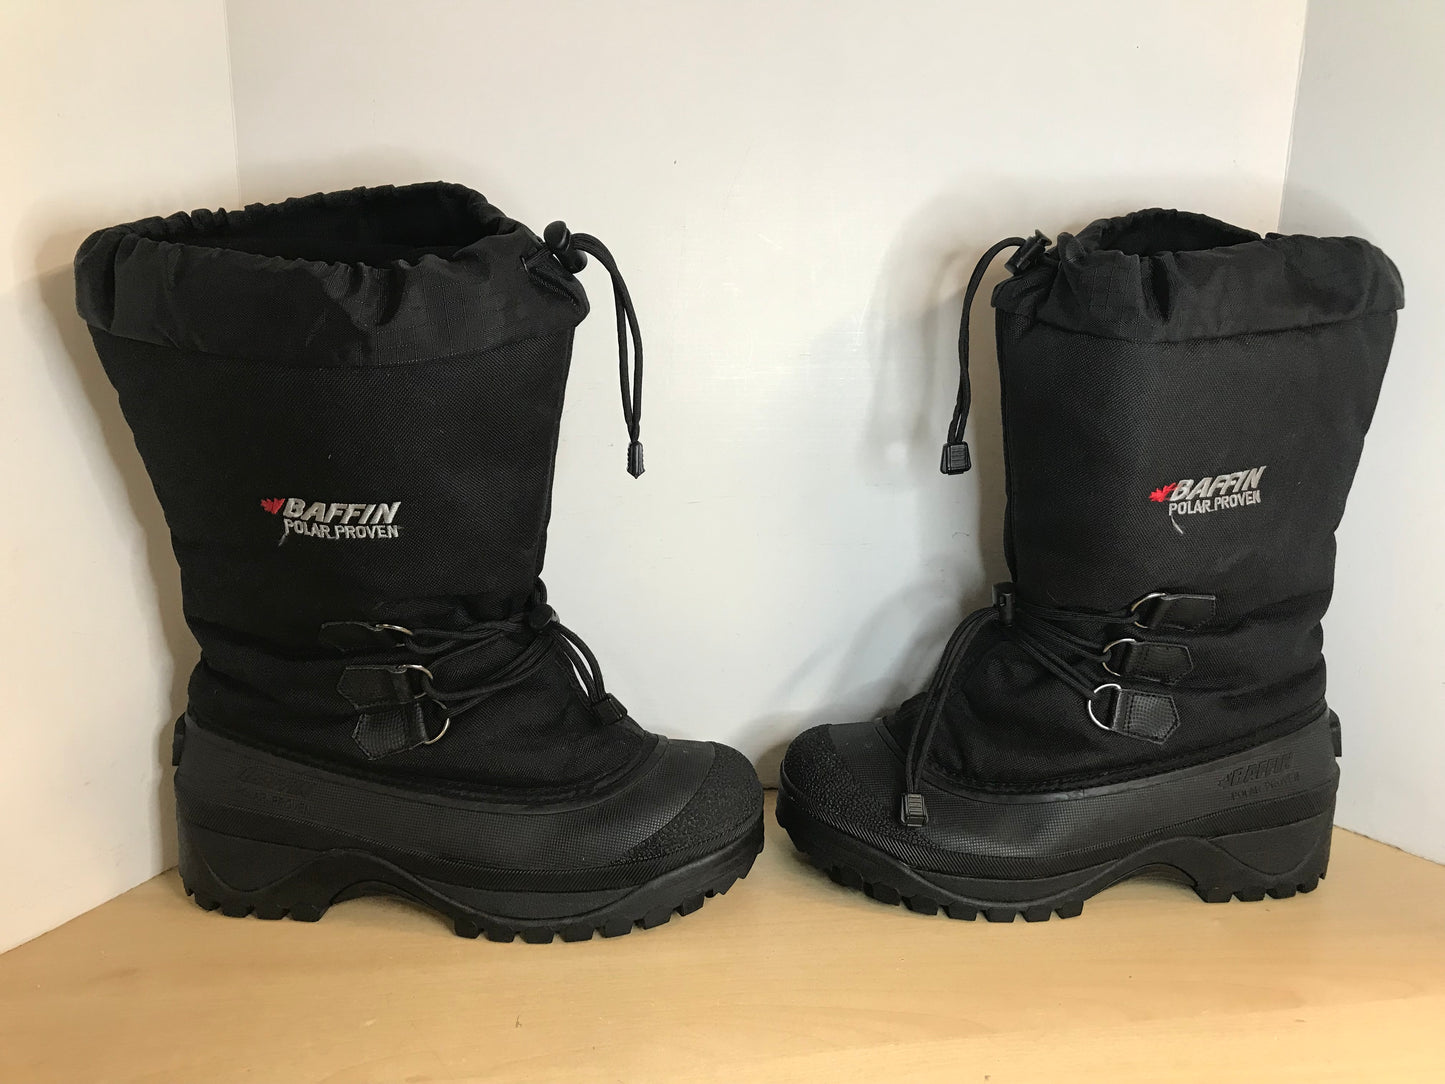 Winter Boots Men's Size 11 Baffin Polar Proven Polar Deep Cold Arctic Wear Black With Liner New Demo Model Outstanding Quality